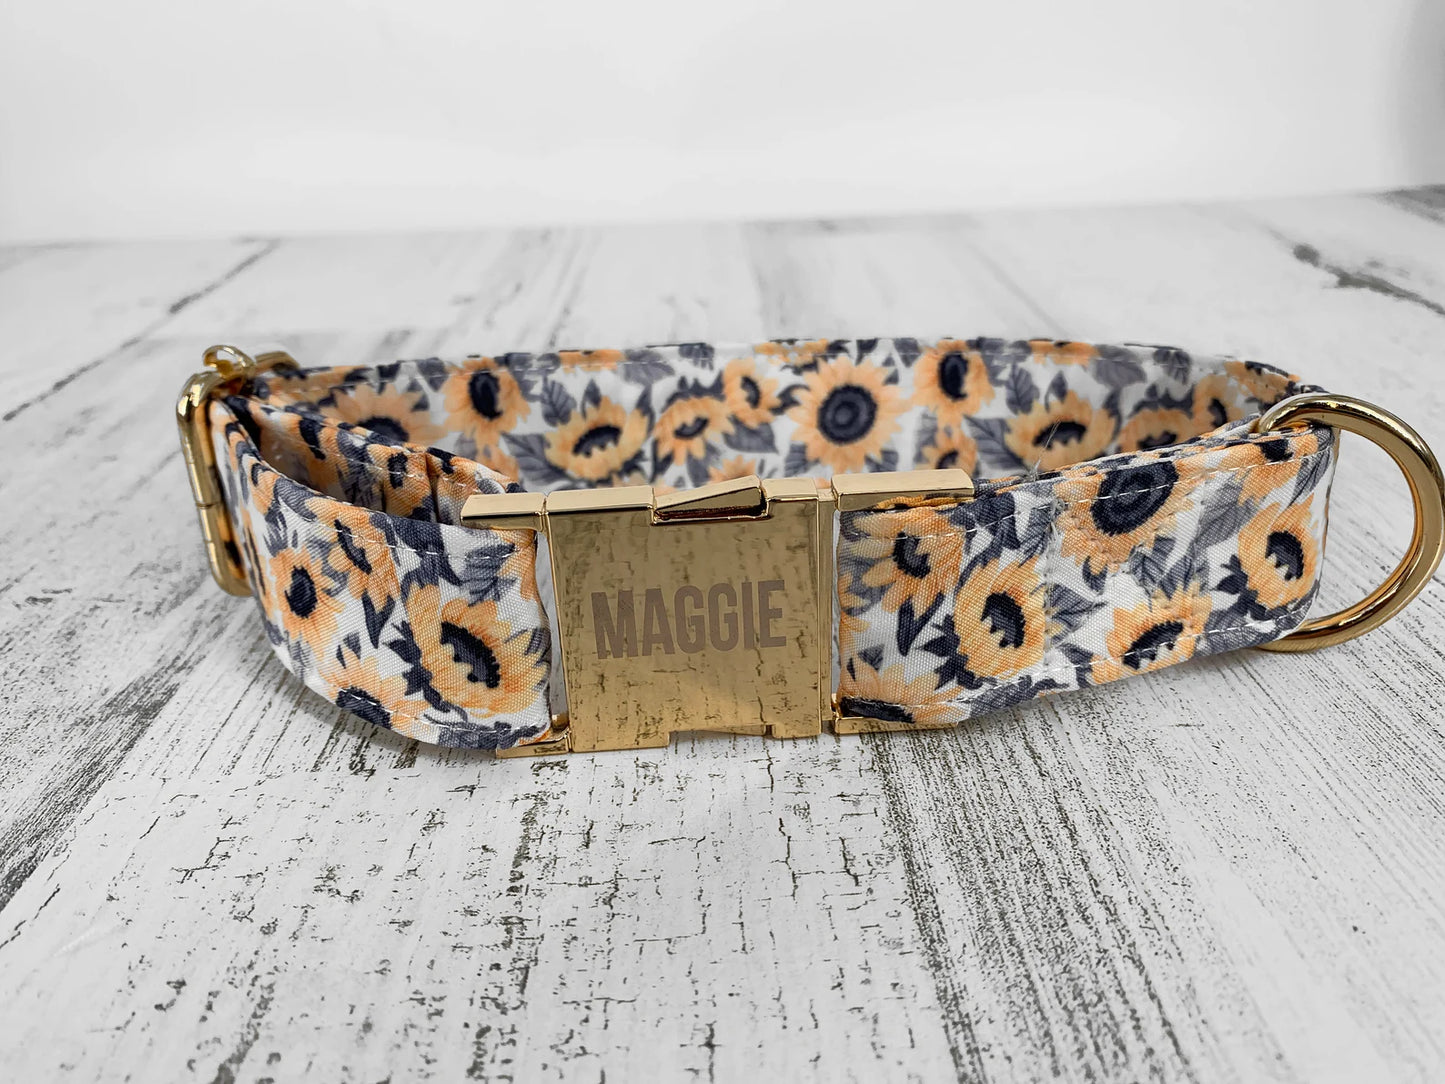 Sunflower Personalized Dog Collar